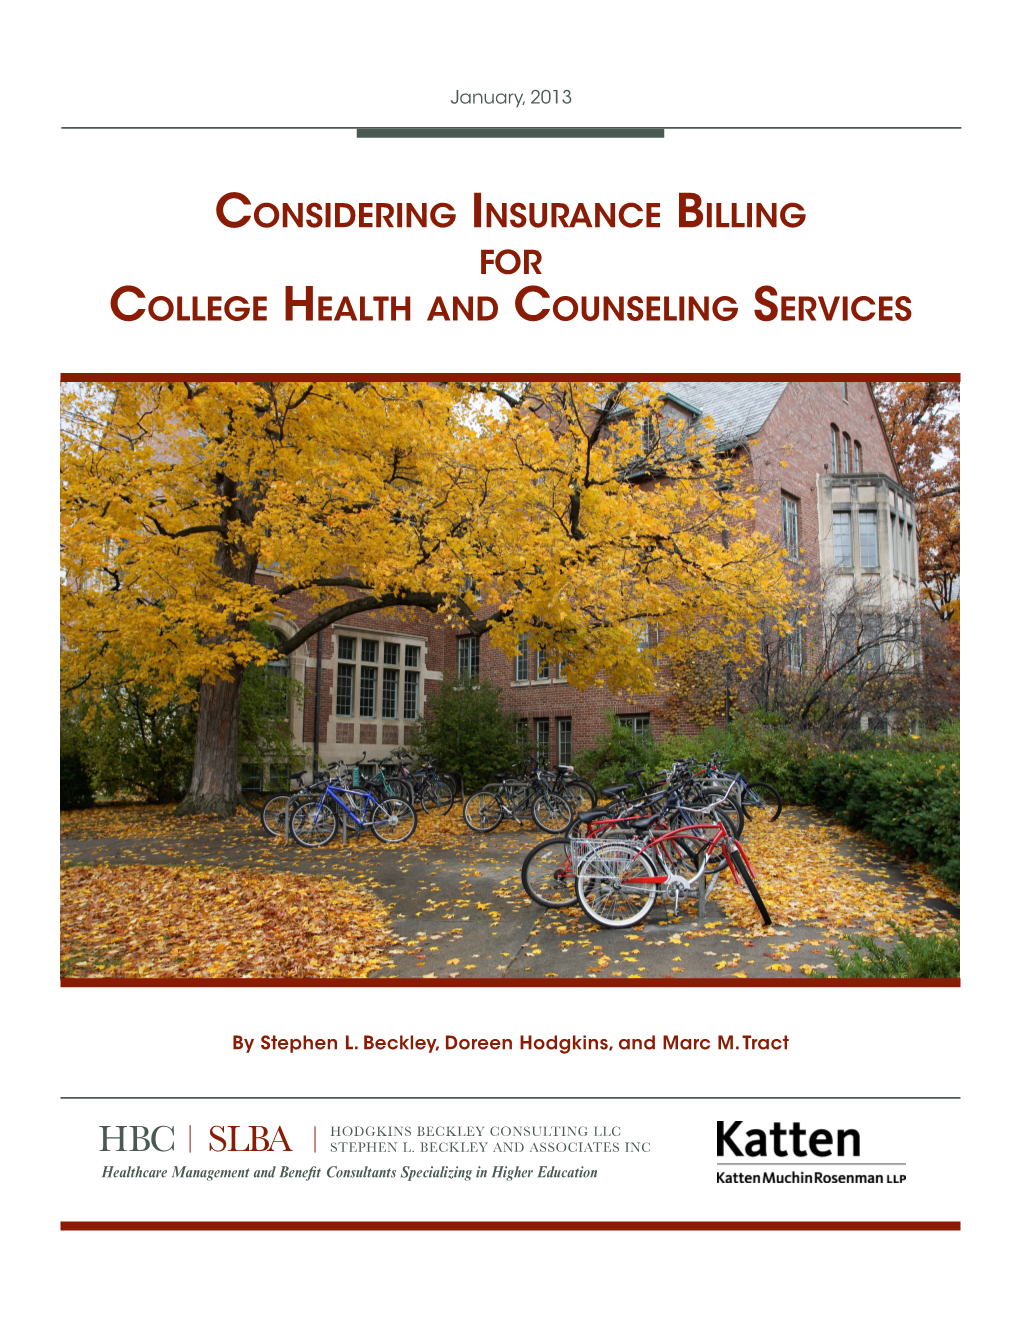 Considering Insurance Billing for College Health and Counseling Services